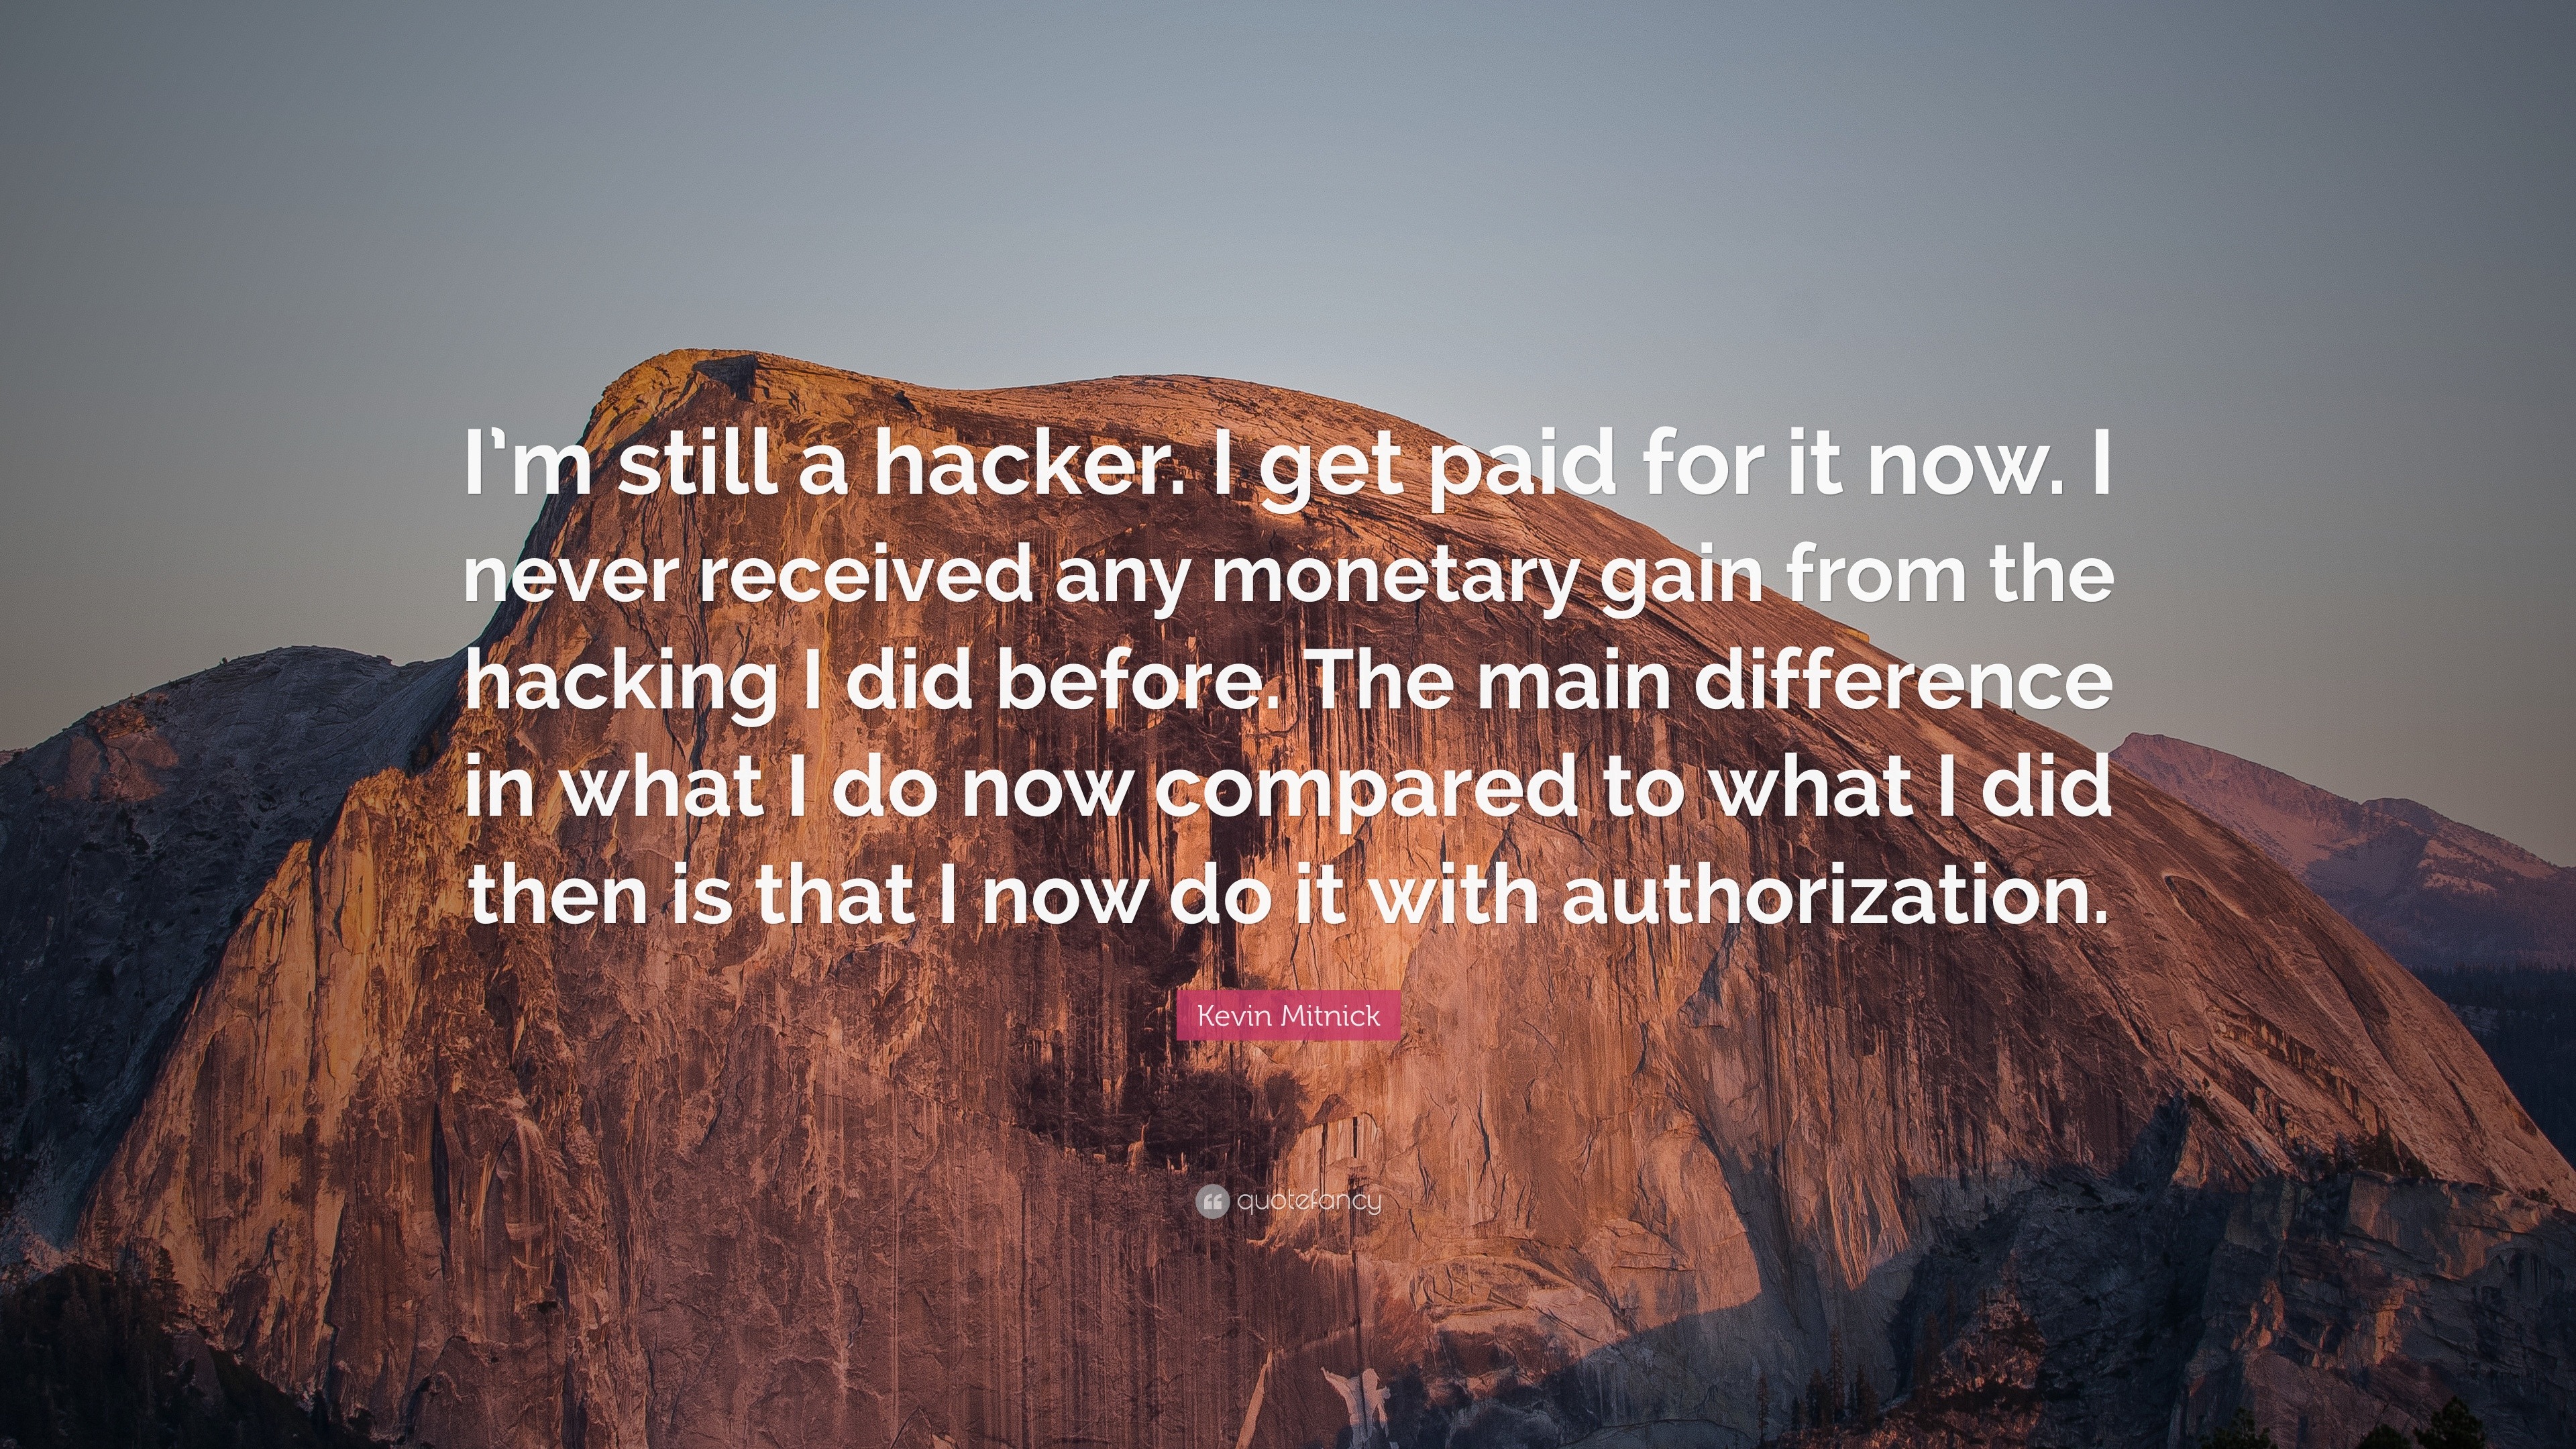 Kevin Mitnick Quote “I’m still a hacker. I get paid for it now. I